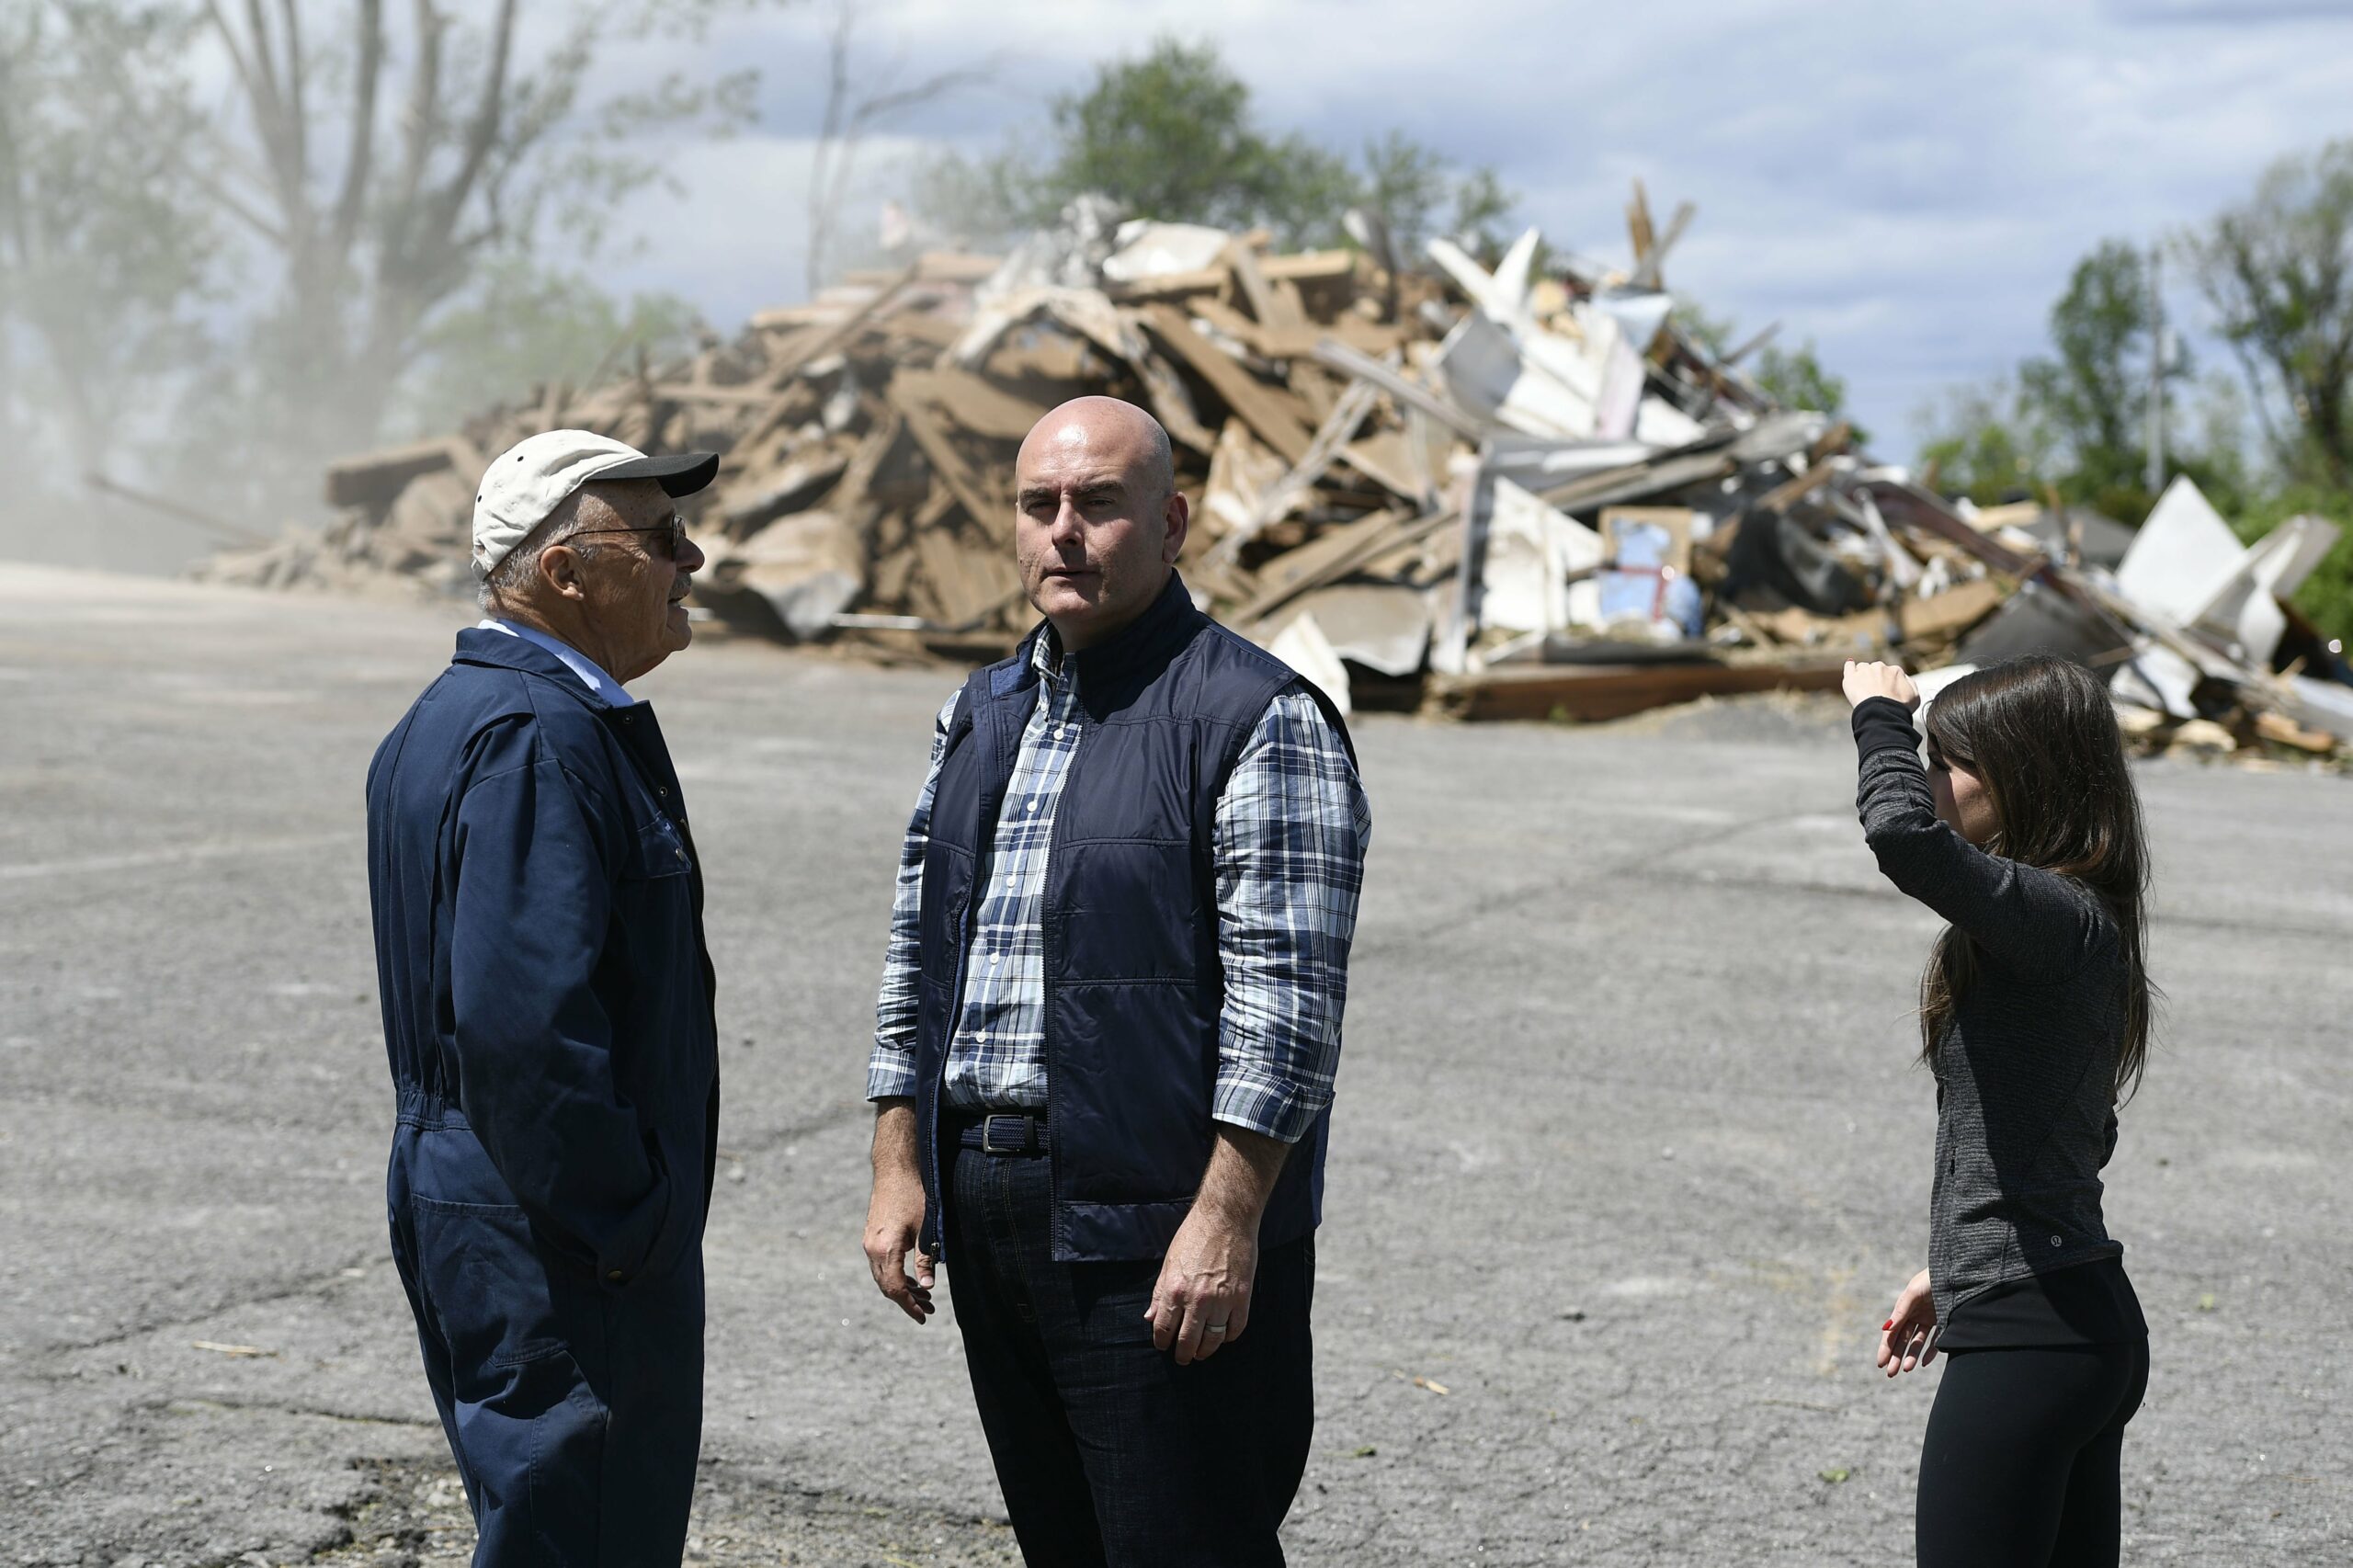 Del Duca ‘suspends’ campaign to visit storm-affected areas, Ford ghosts media